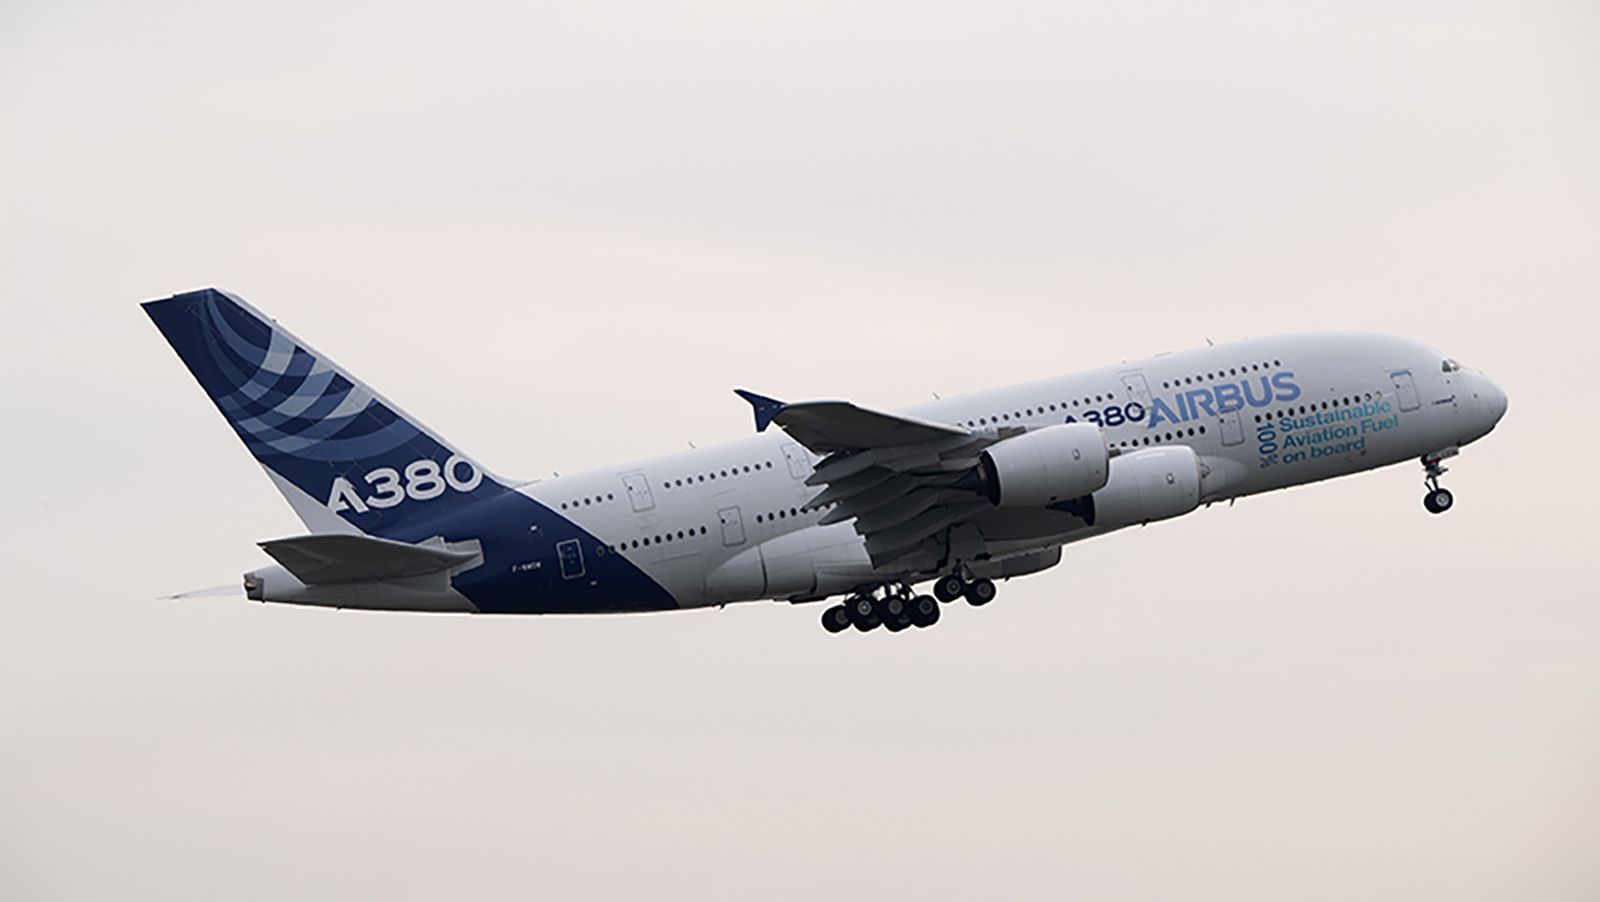 An A380 just completed a flight powered by cooking oil | CNN